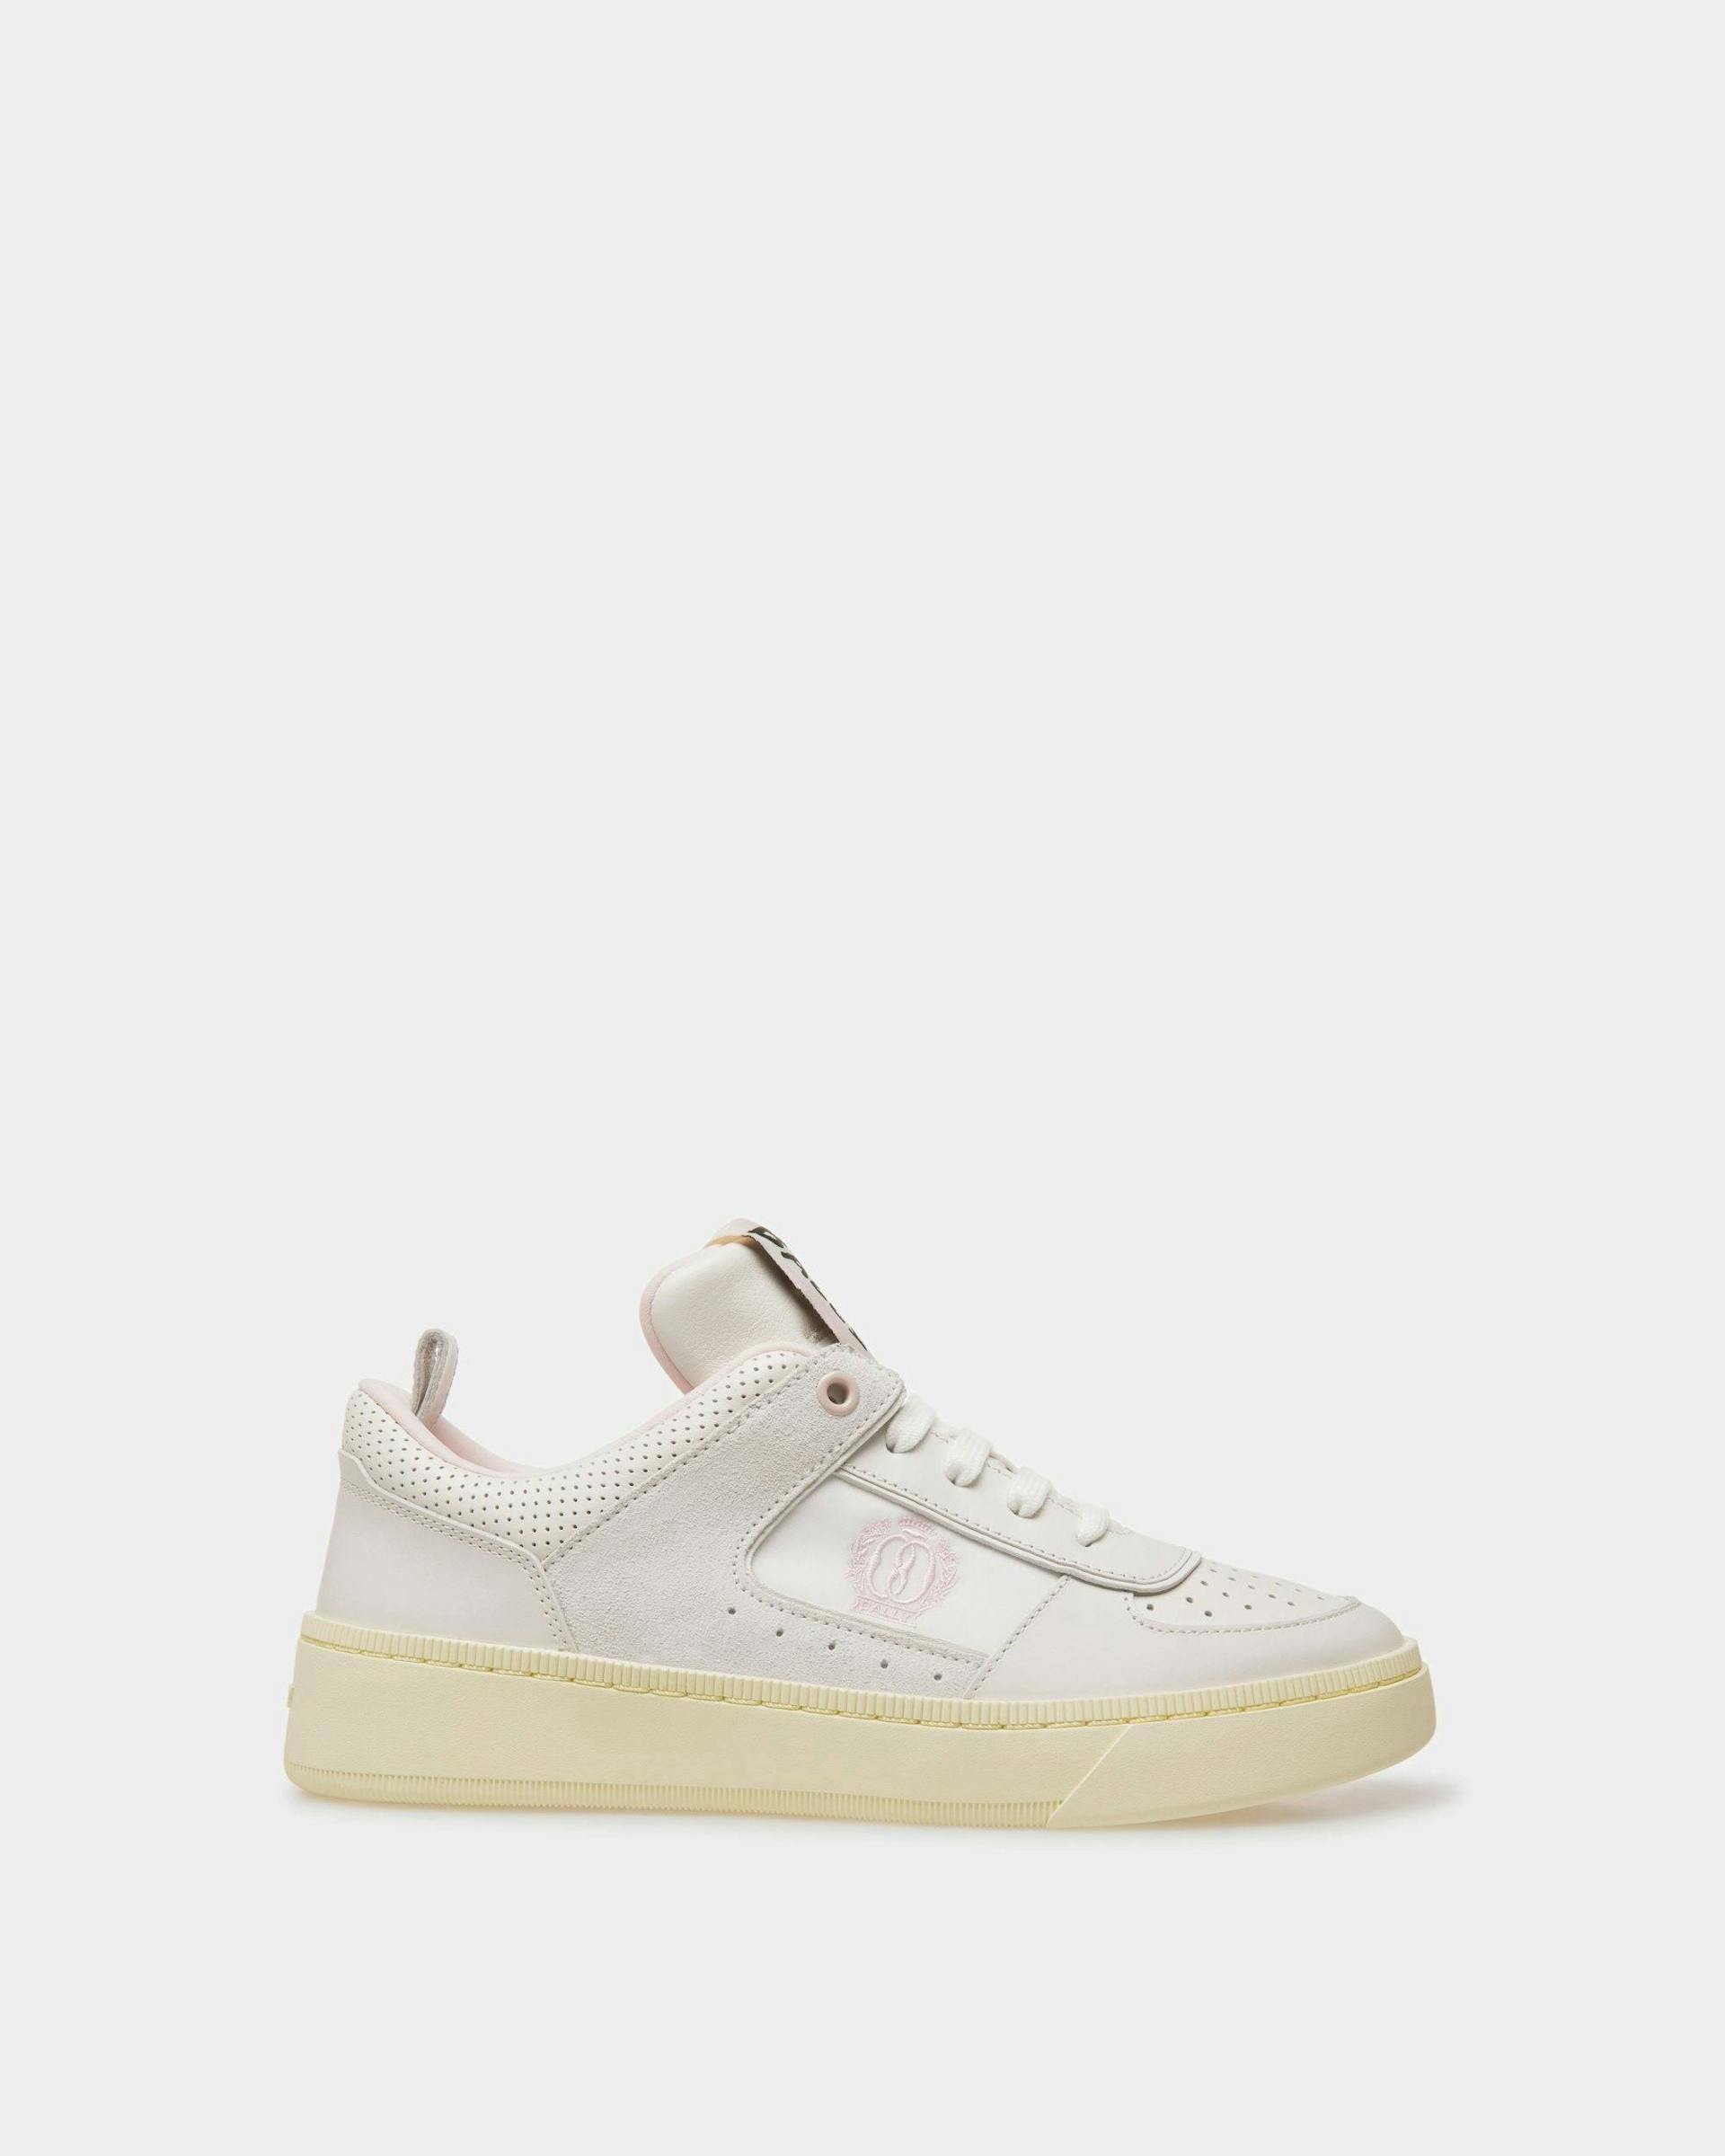 Raise Sneakers In White And Rosa Leather - Women's - Bally - 01